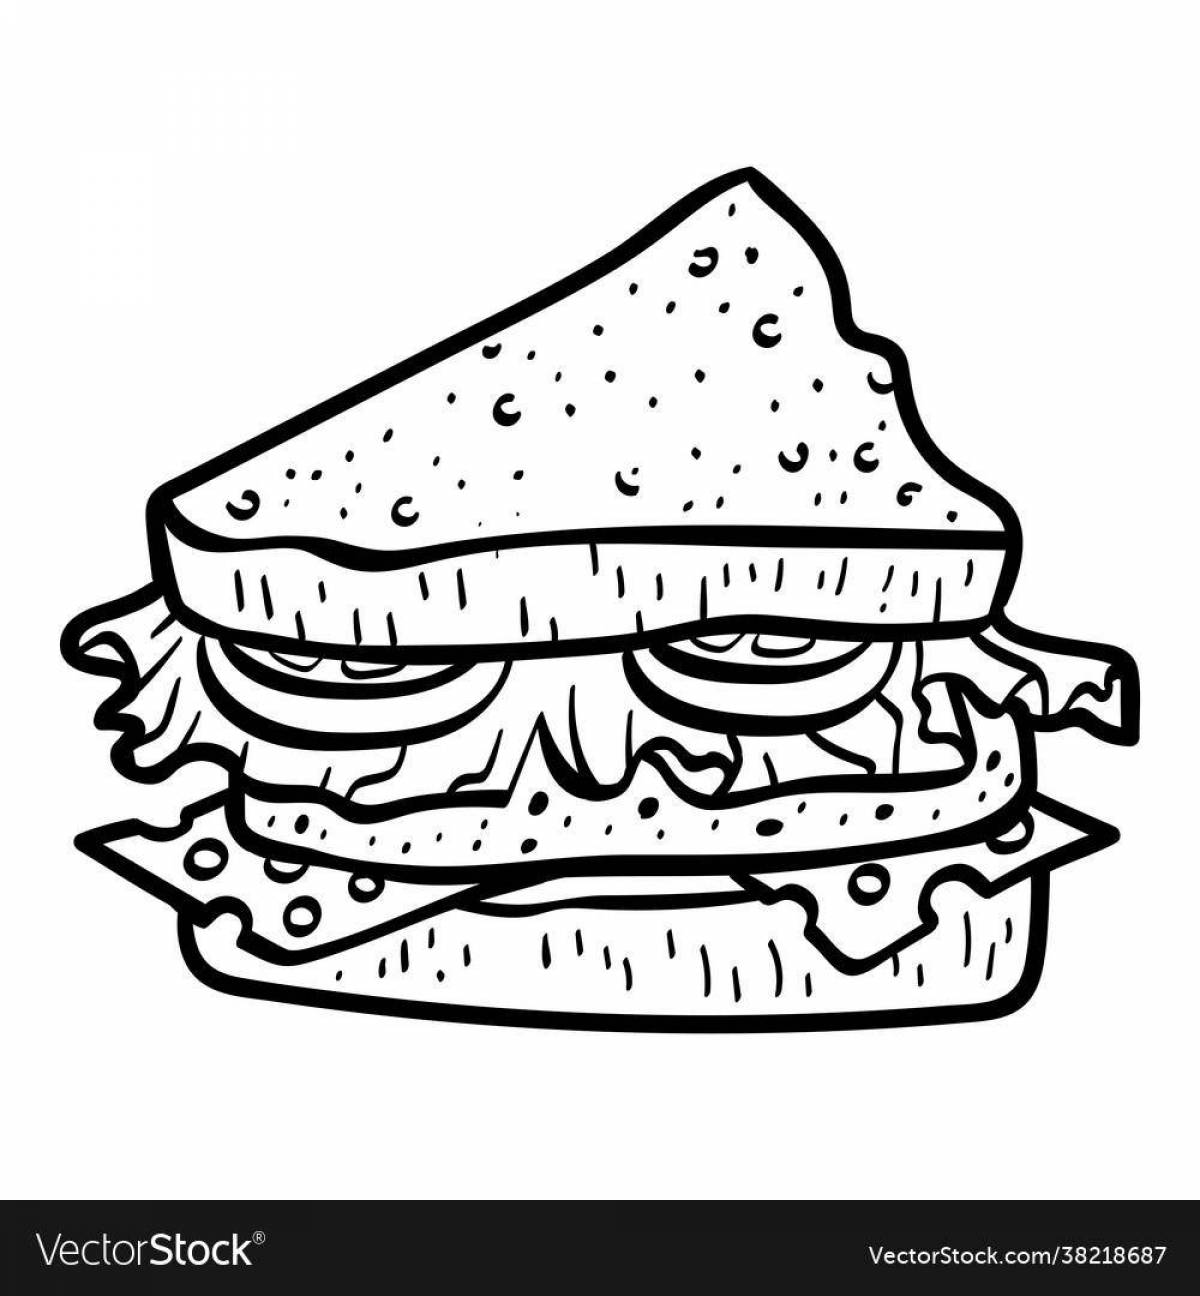 Playful sandwich coloring page for kids